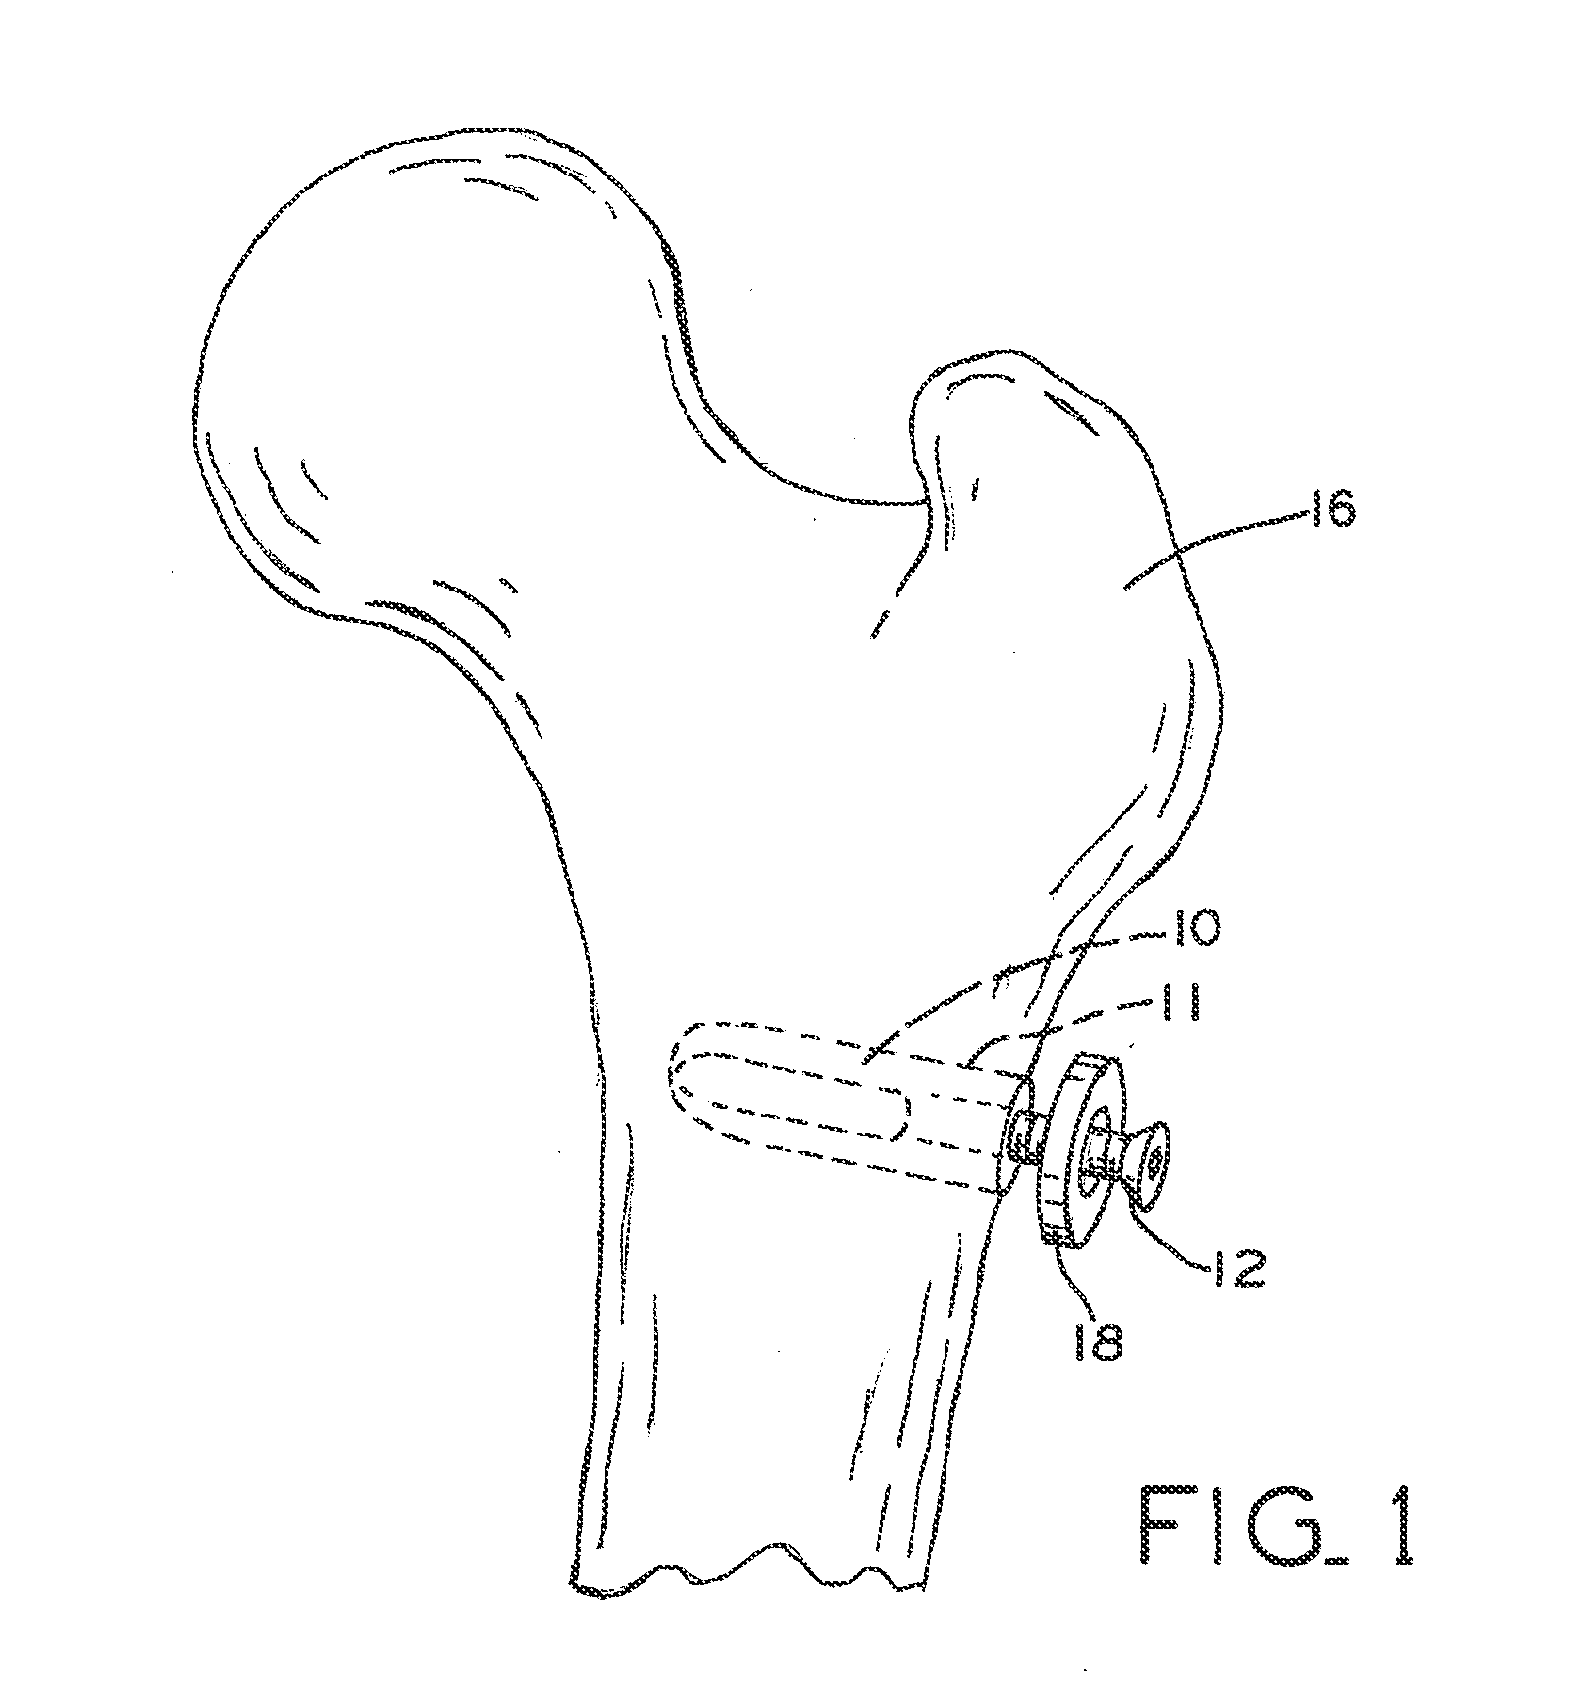 Screw thread placement in a porous medical device